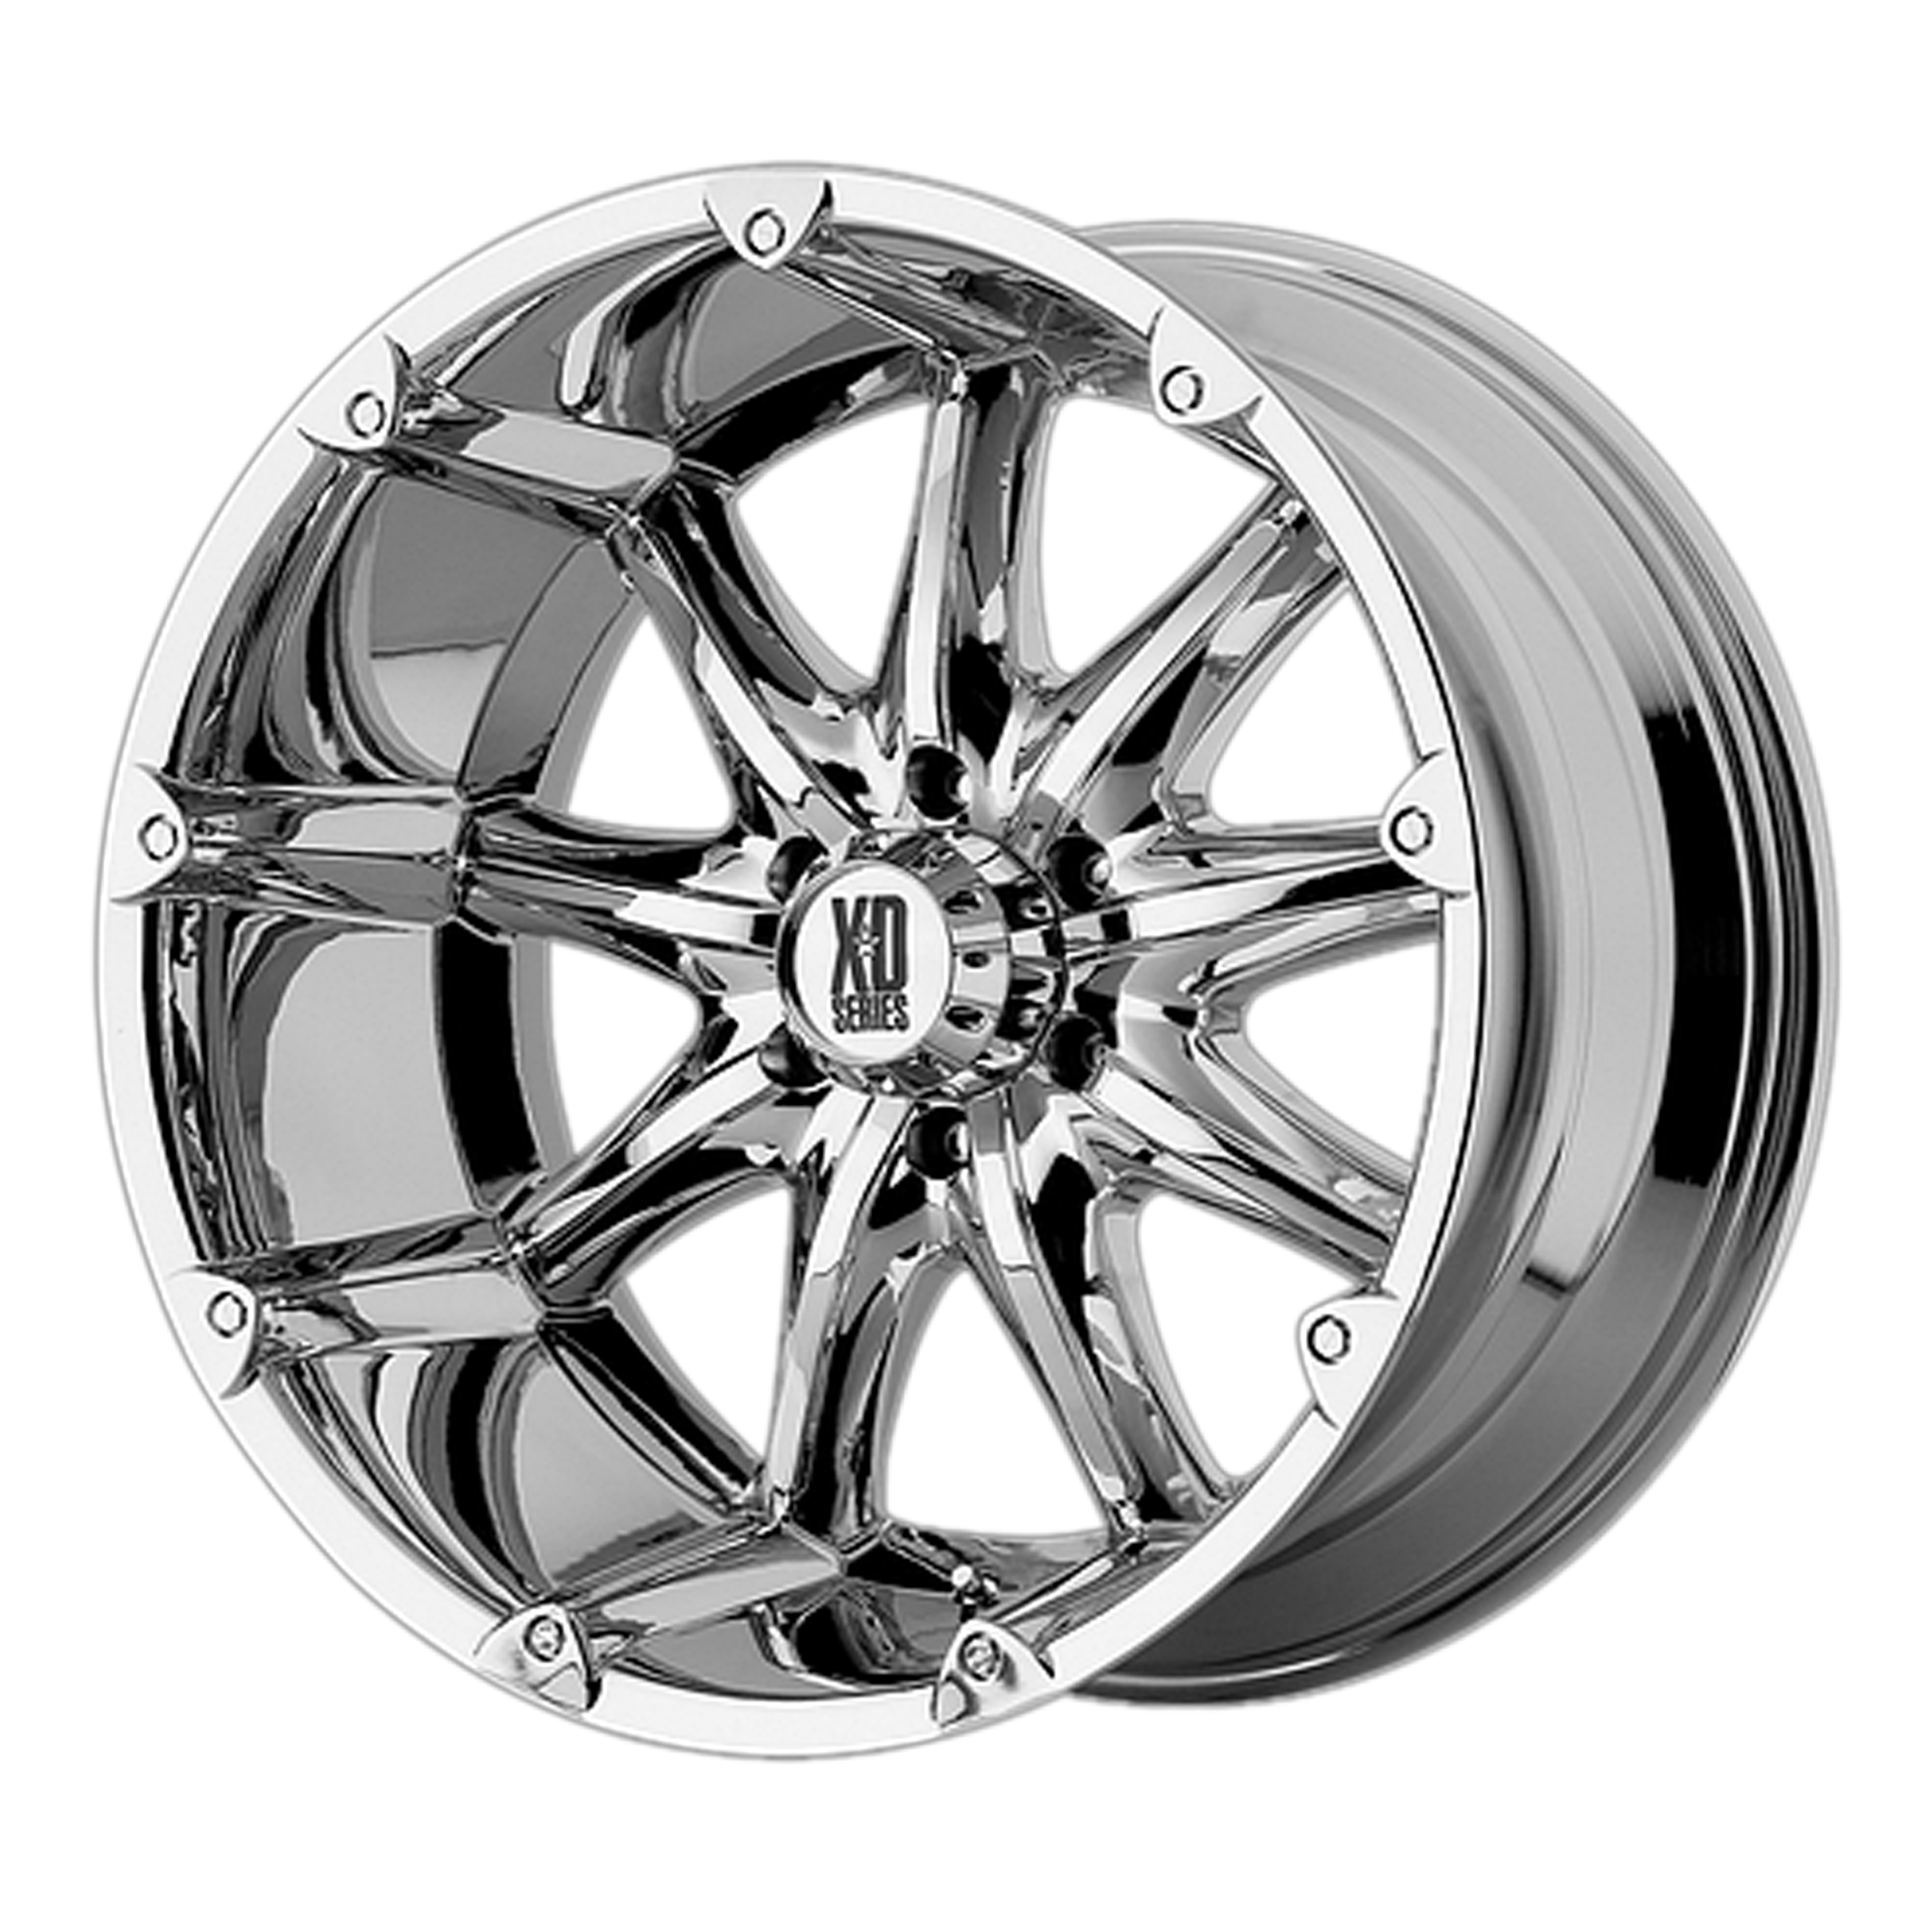 BADLANDS 20x9 6x139.70 CHROME (18 mm) - Tires and Engine Performance